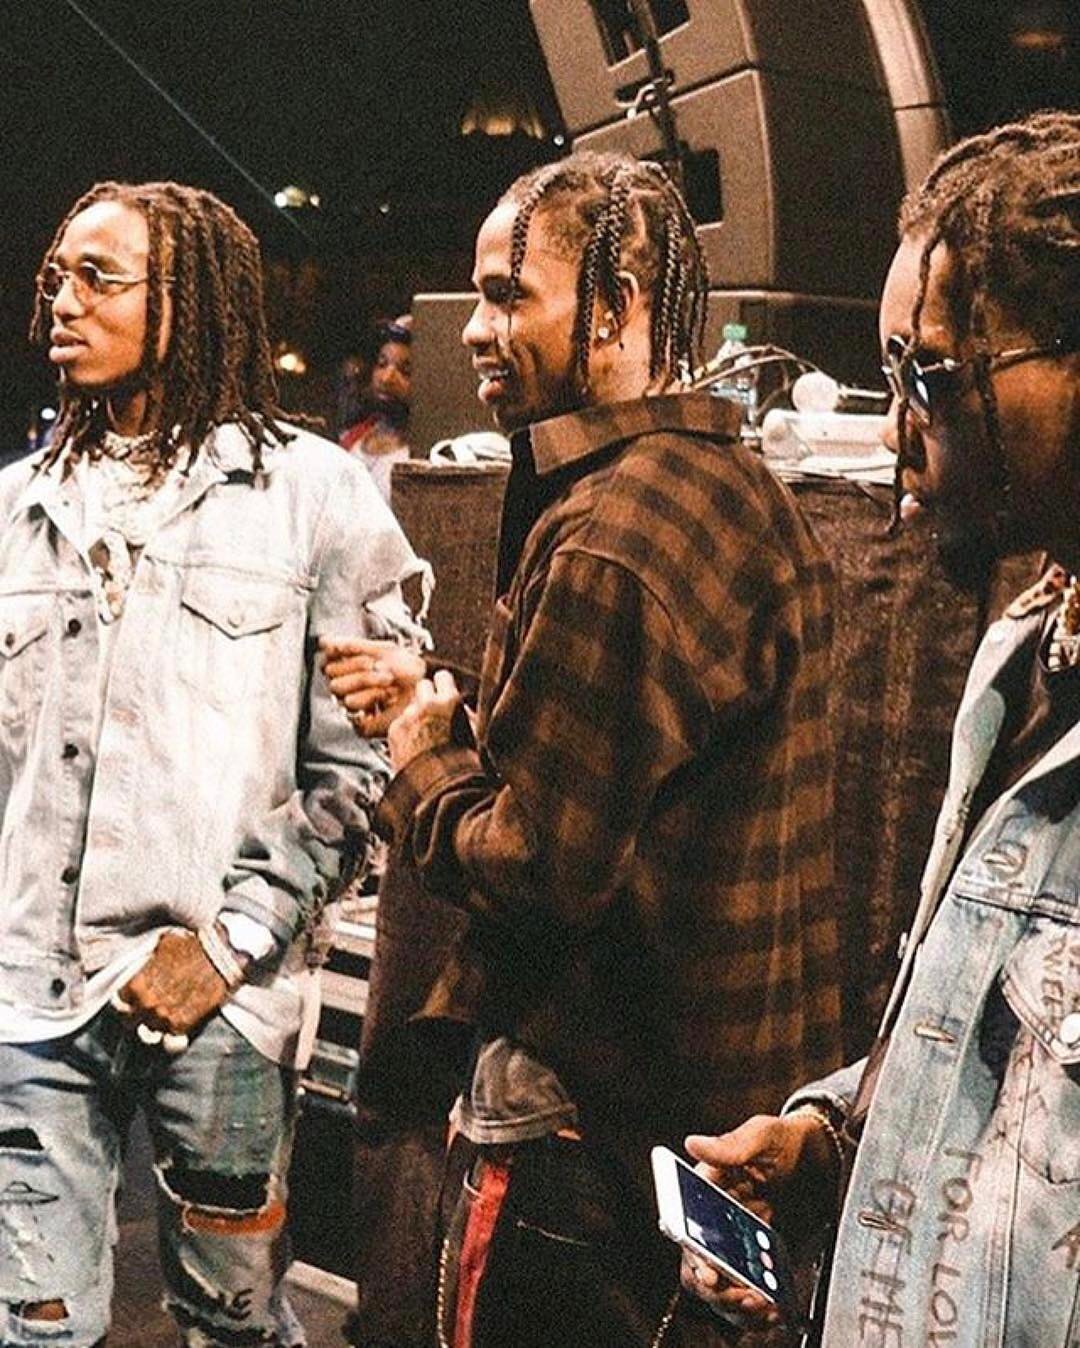 SPOTTED: Travis Scott, Quavo And Offset In Balenciaga And Gucci